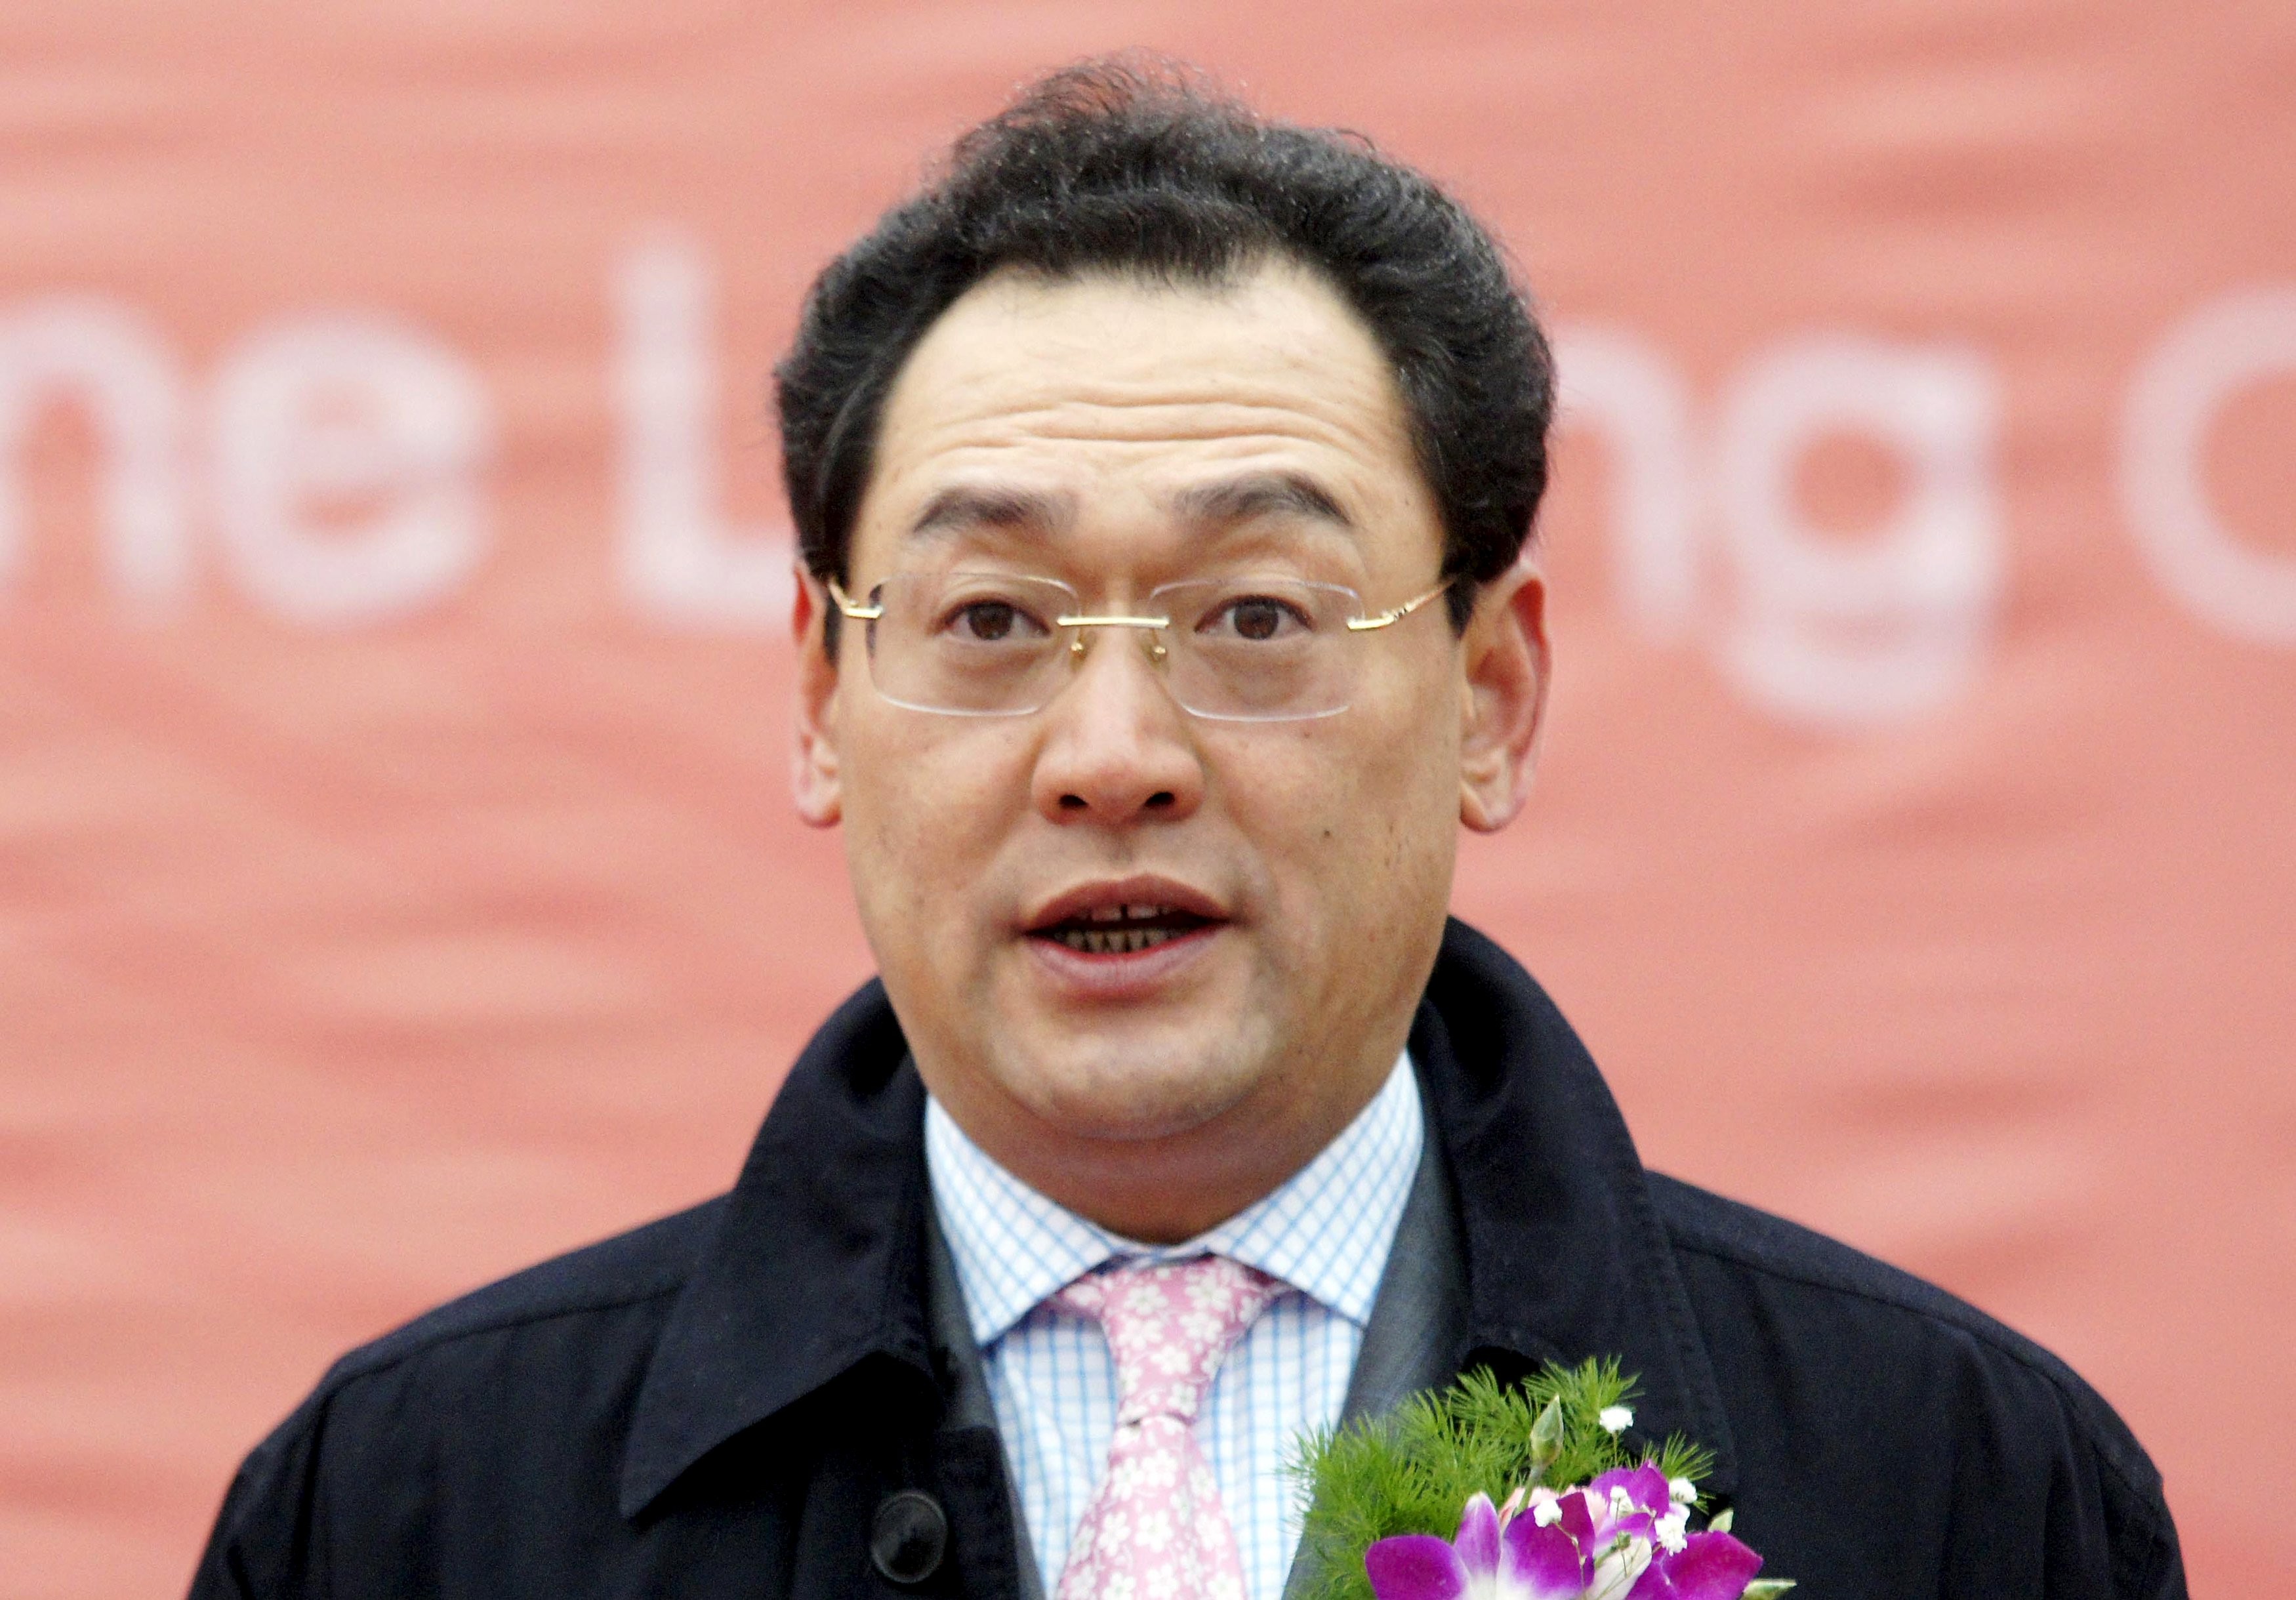 Charley Song Lin was sentenced to 14 years in jail and fined 4 million yuan (US$628,000) by a Guangzhou court last June after he was found guilty of embezzling public assets. Photo: Reuters